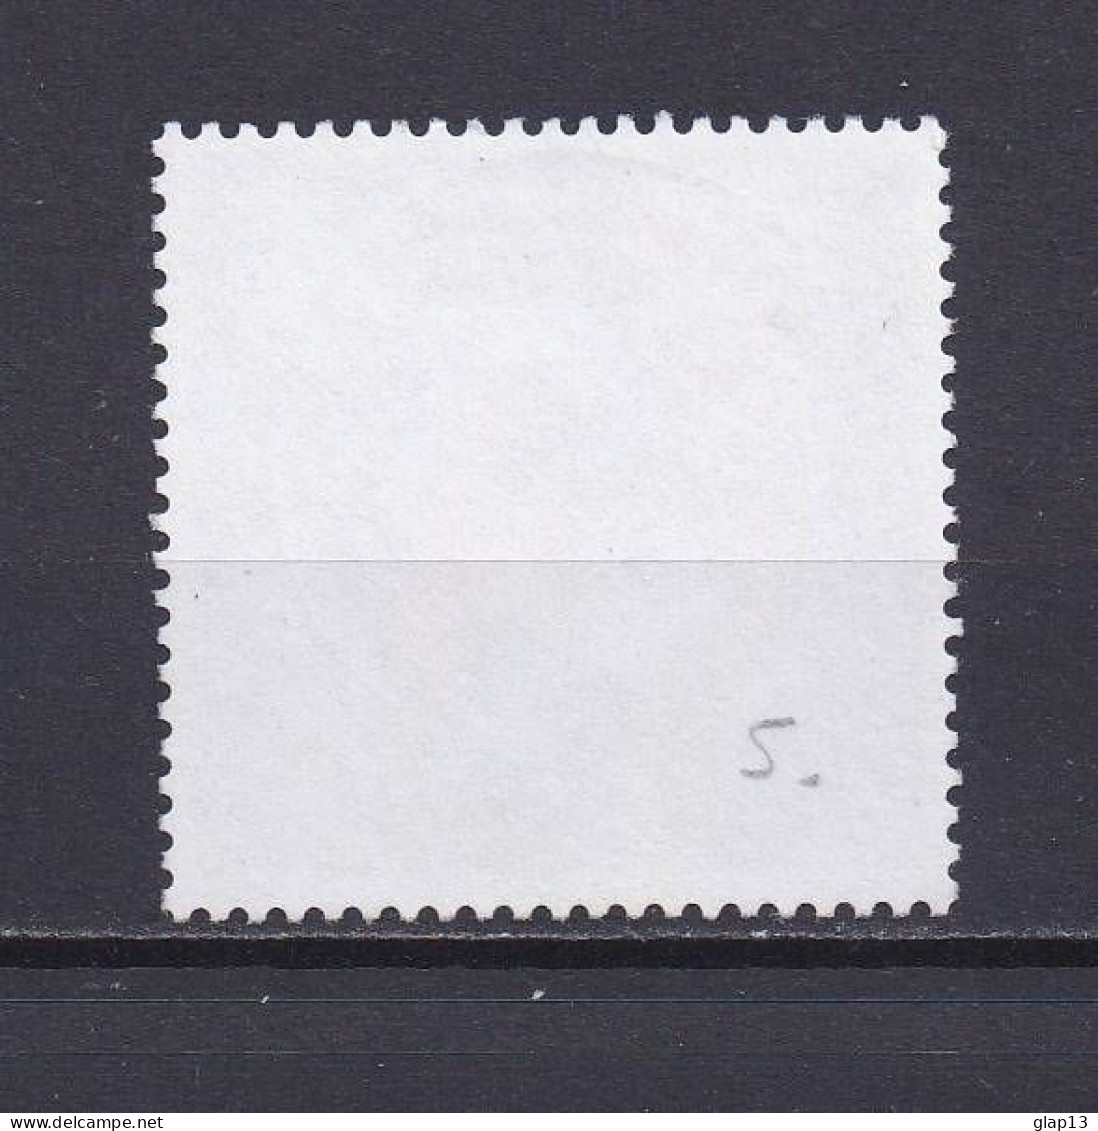 LUXEMBOURG 1998 TIMBRE N°1414 OBLITERE NOEL - Used Stamps